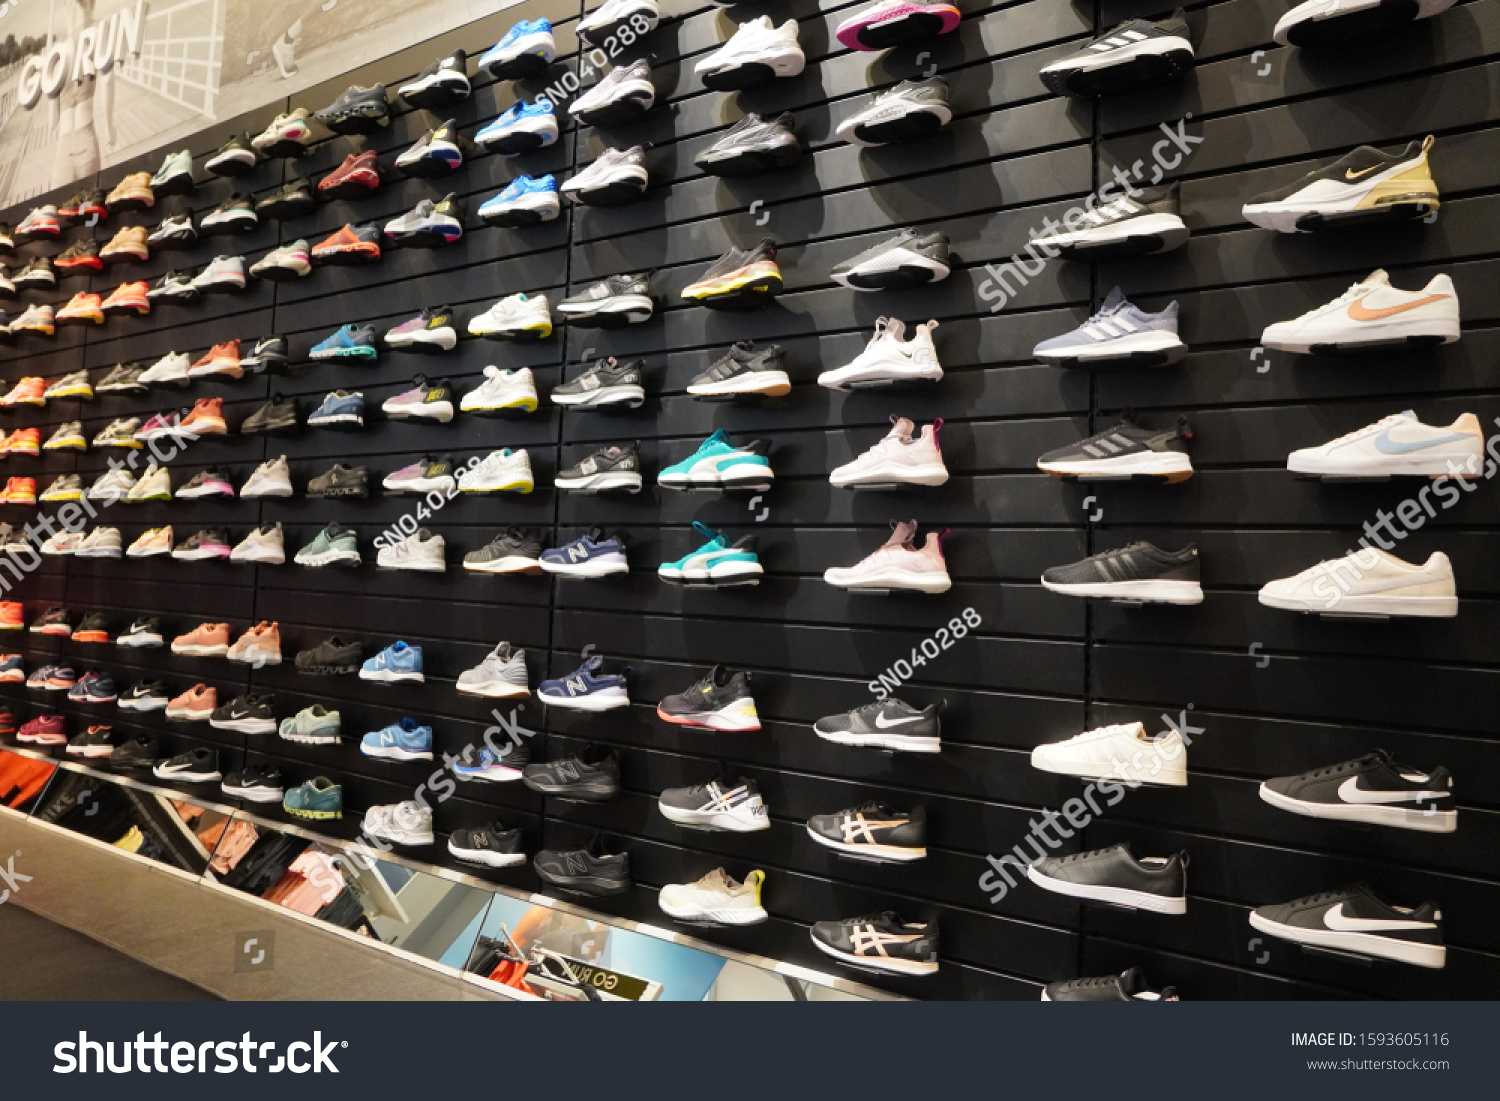 Shop Display Sports Shoes On Wall Stock Photo 1593605116 | Shutterstock